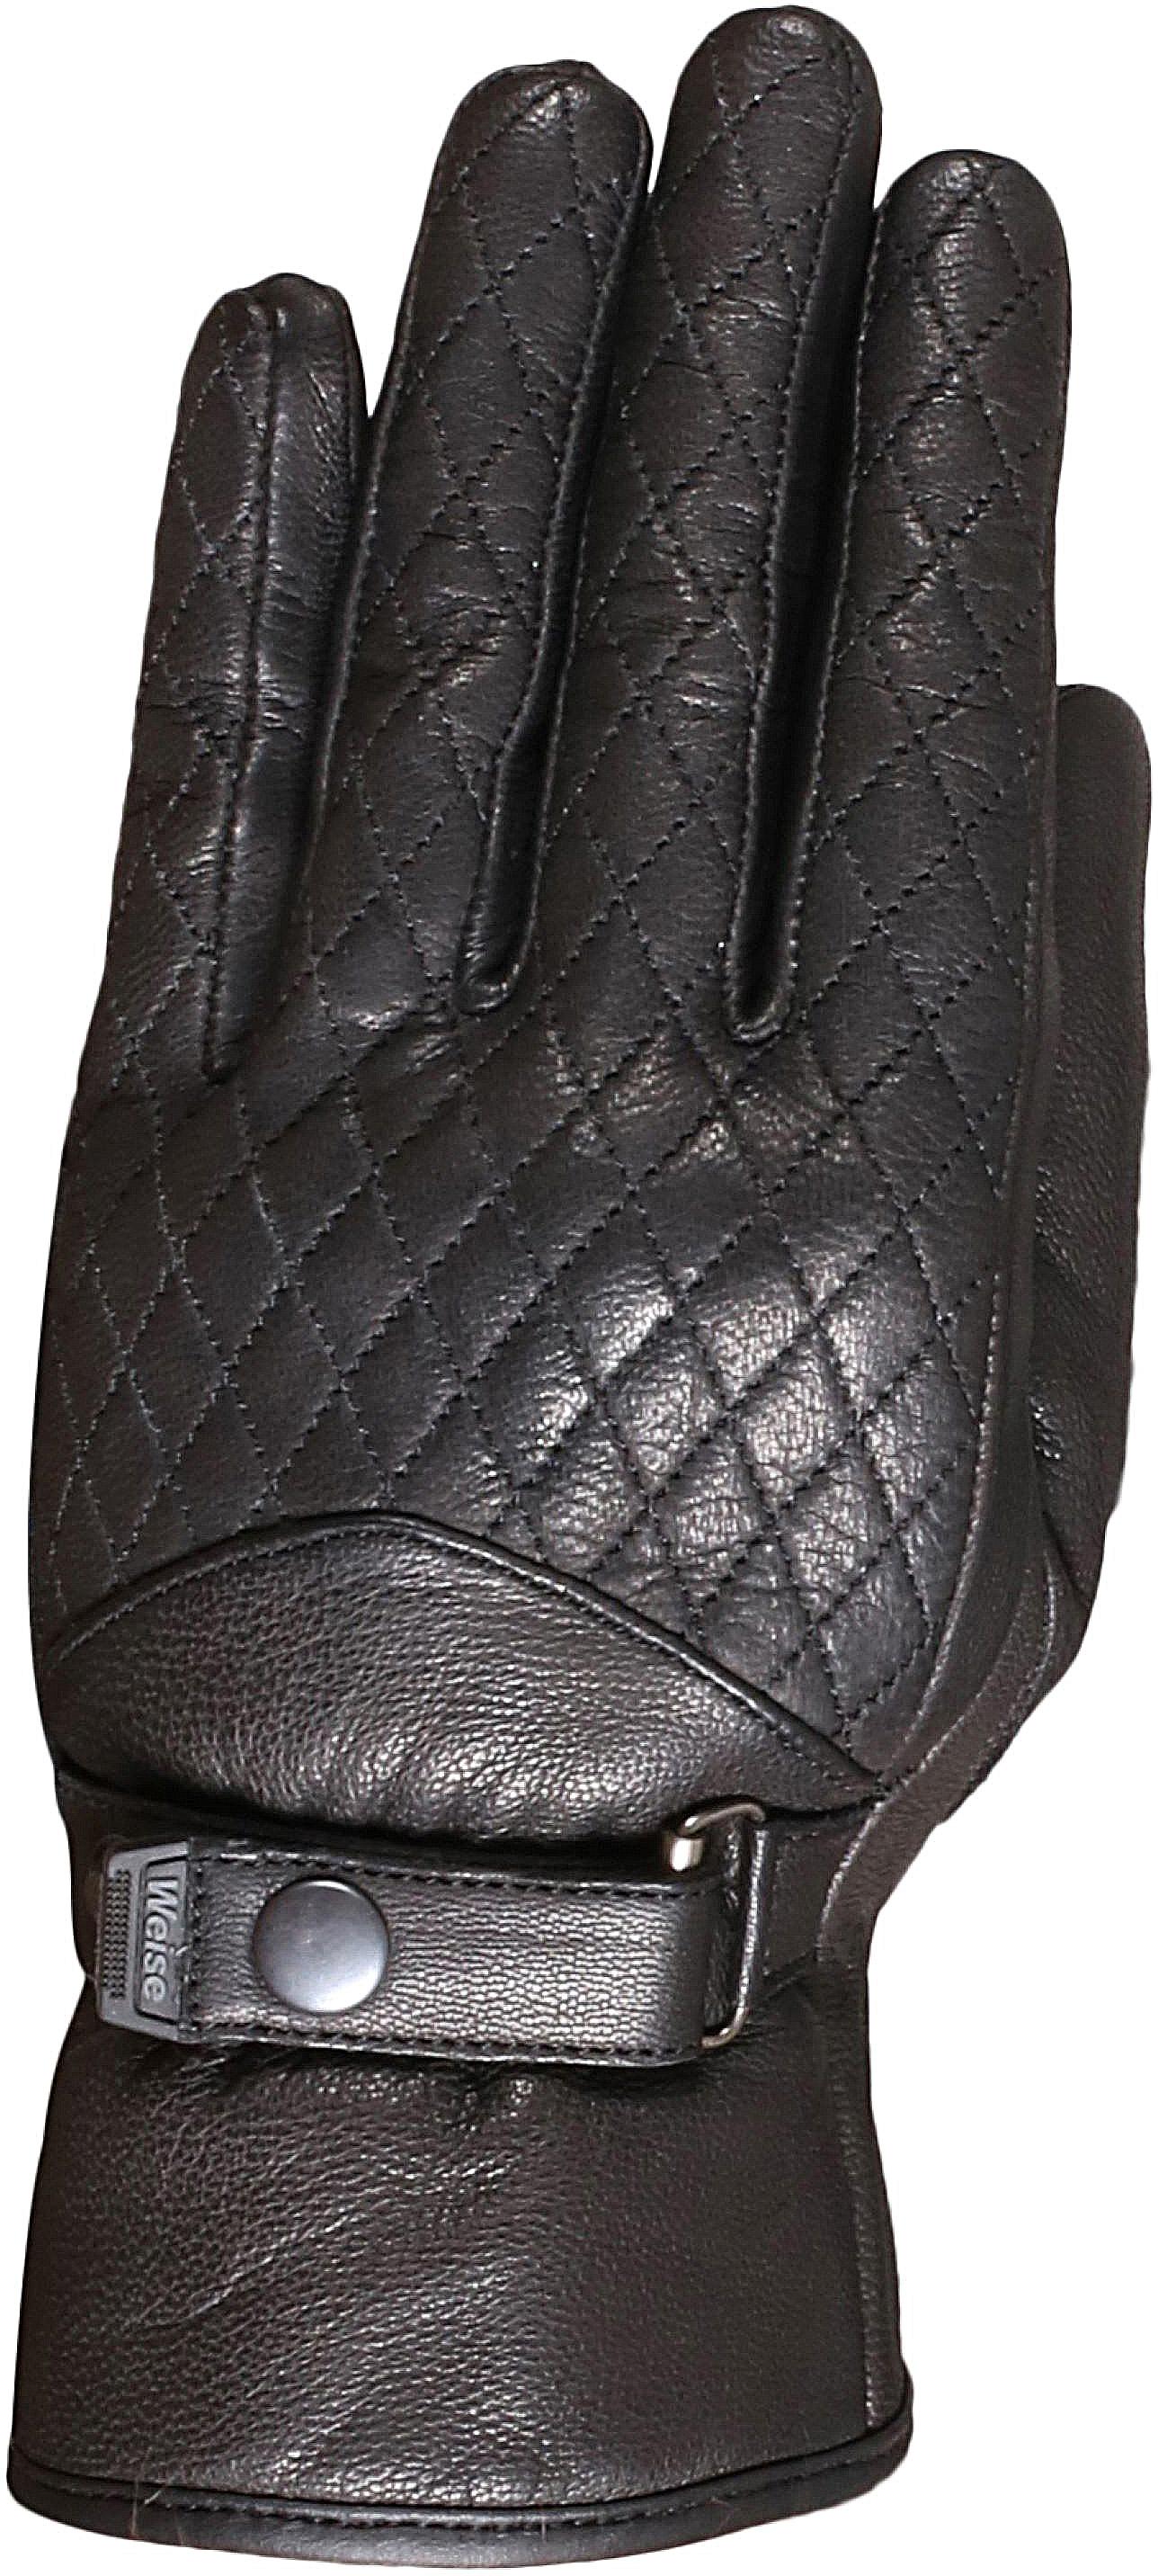 Weise Halo Womens Motorcycle Gloves - Black, L